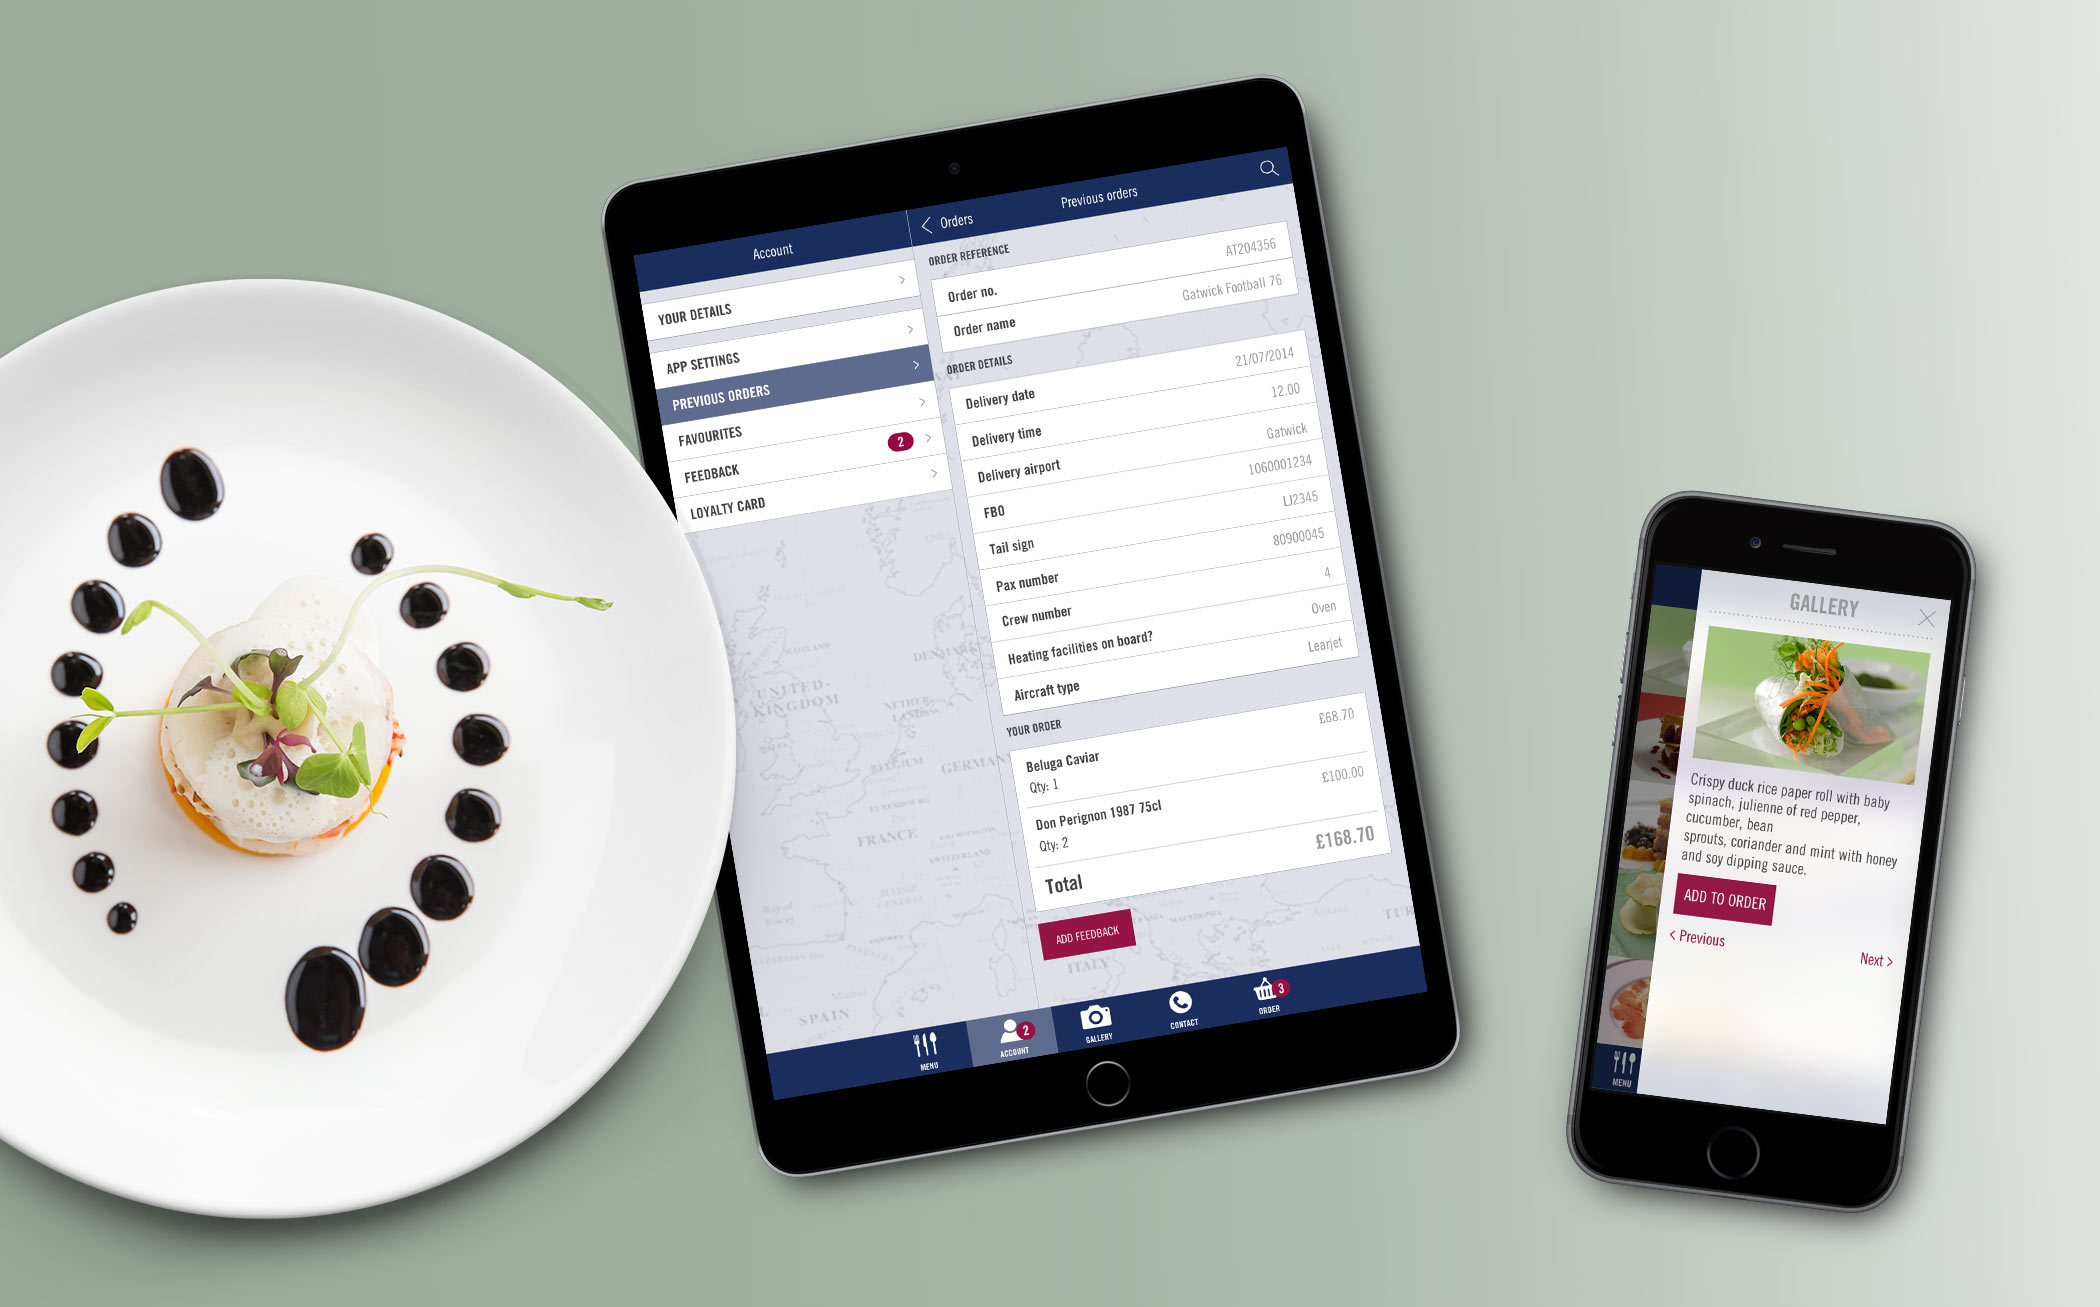 Absolute Taste native app design shown on tablet and phone